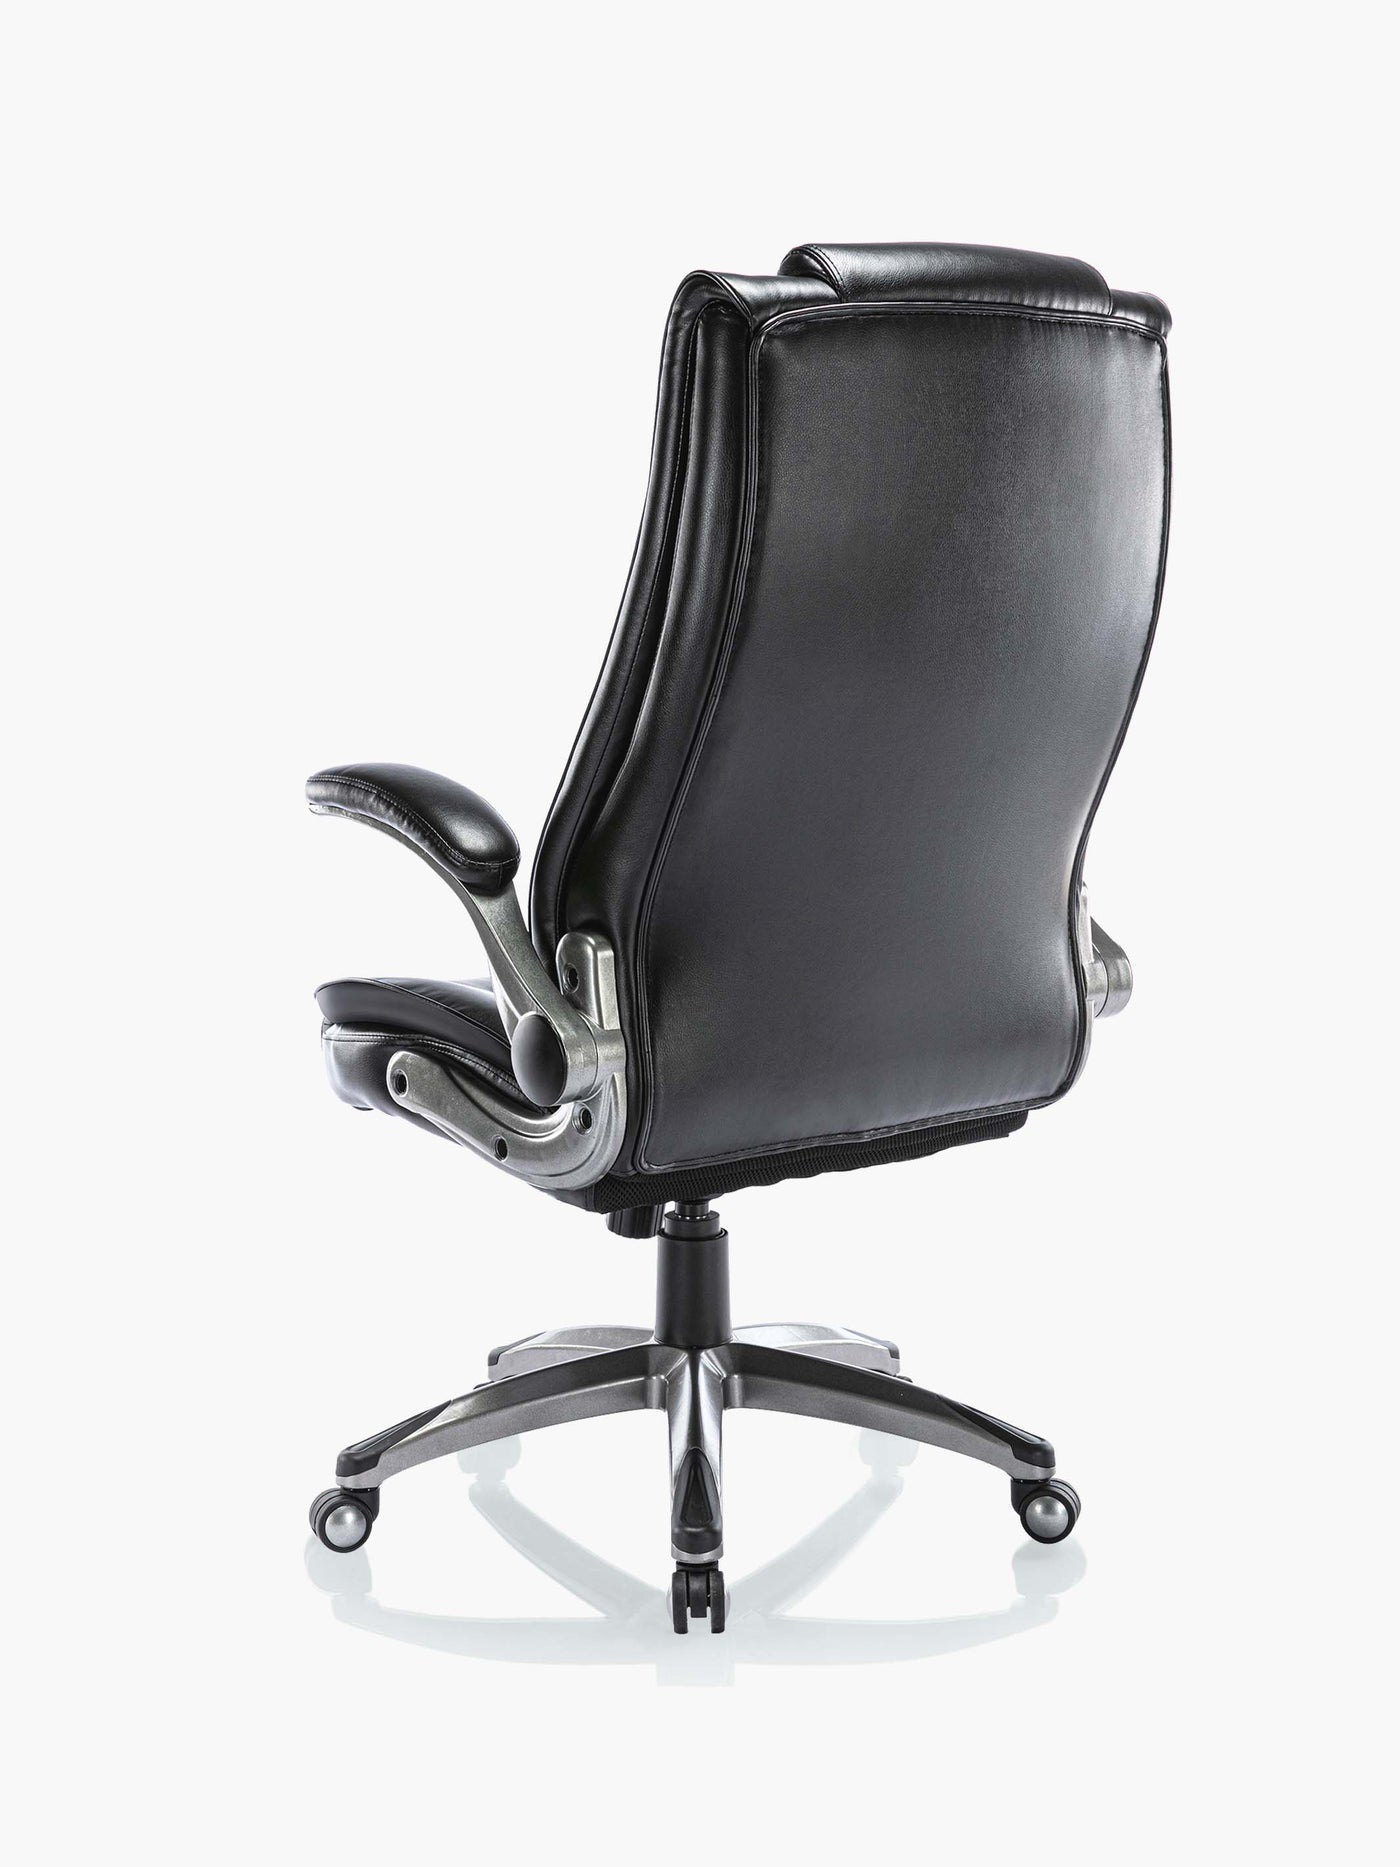 COLAMY Ergonomic High Back Leather Office Chair with Flip Up Armrests DM2199 Diamond Pattern #color_black